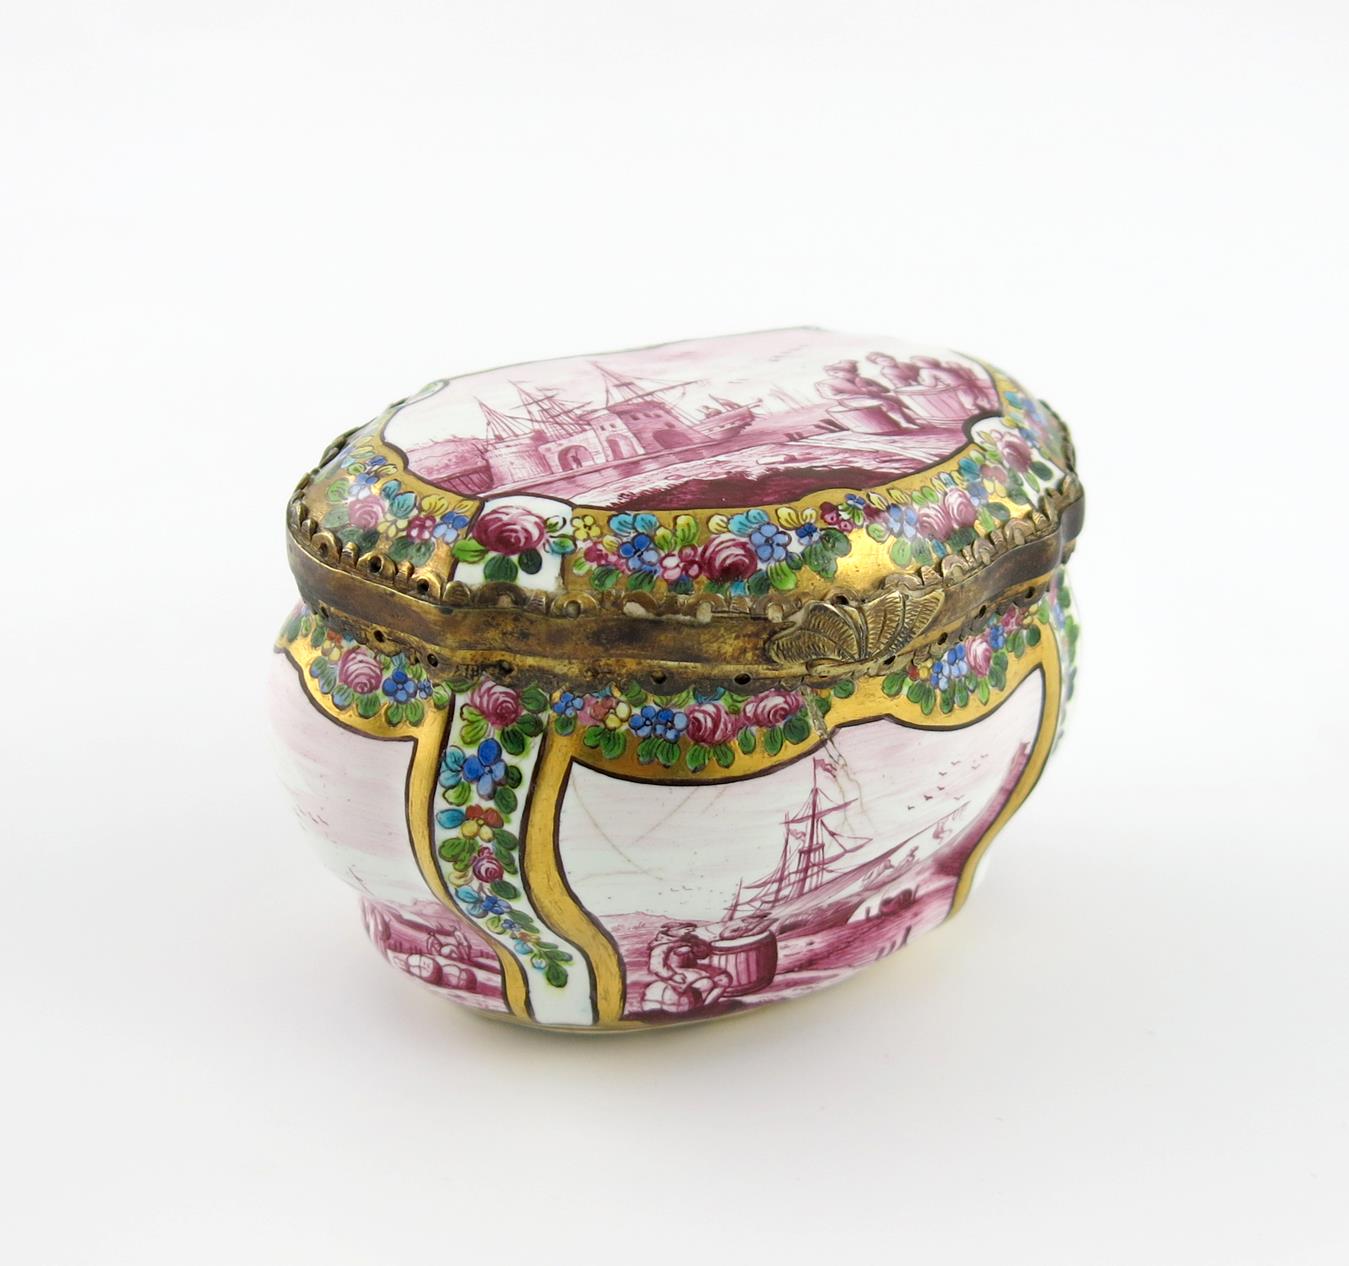 A German enamel bombι shaped snuff box, 2nd half 18th century, the exterior sides and lid painted in